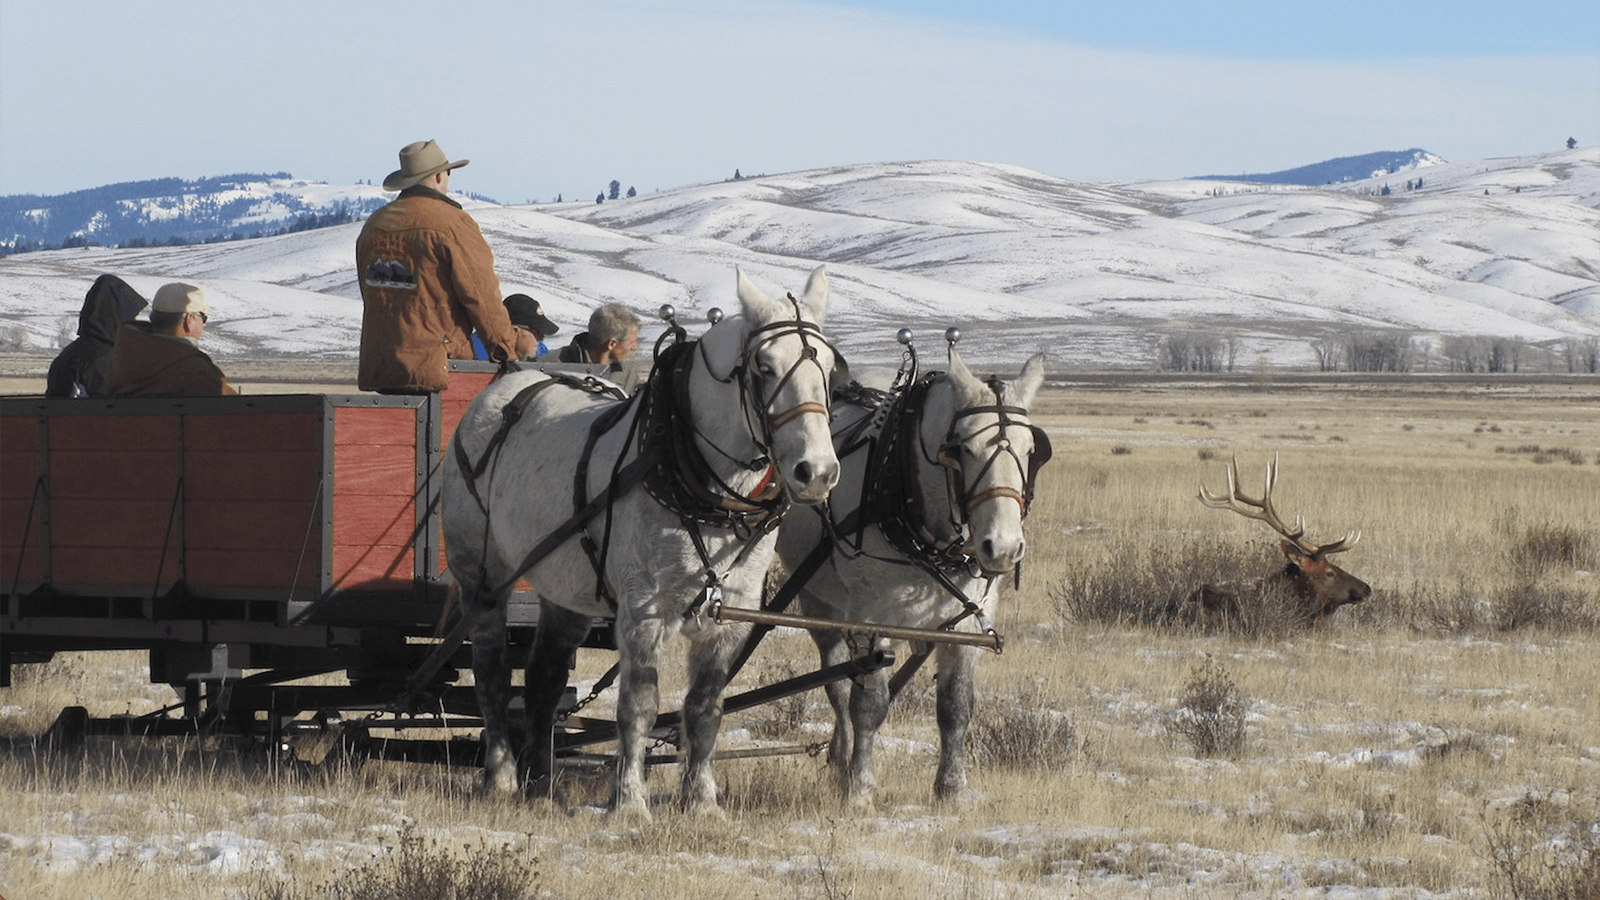 Double H Bar has been the contractor offering sleigh rides on the refuge since 2007.